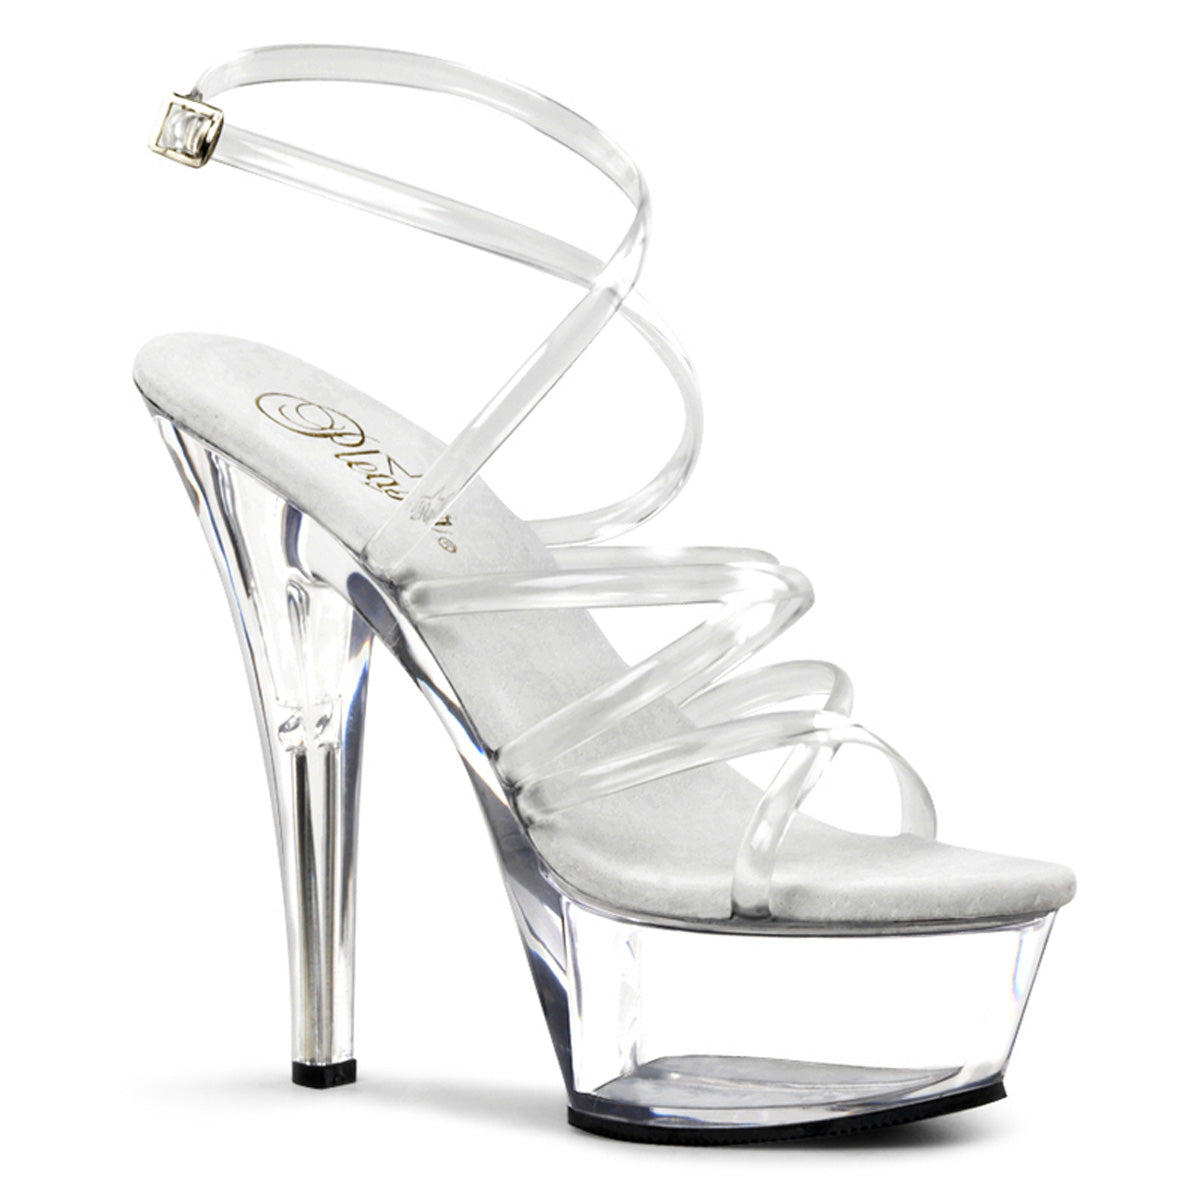 KISS-206 Pleaser 6 Inch Heel Clear Pole Dancing Platforms-Pleaser- Sexy Shoes